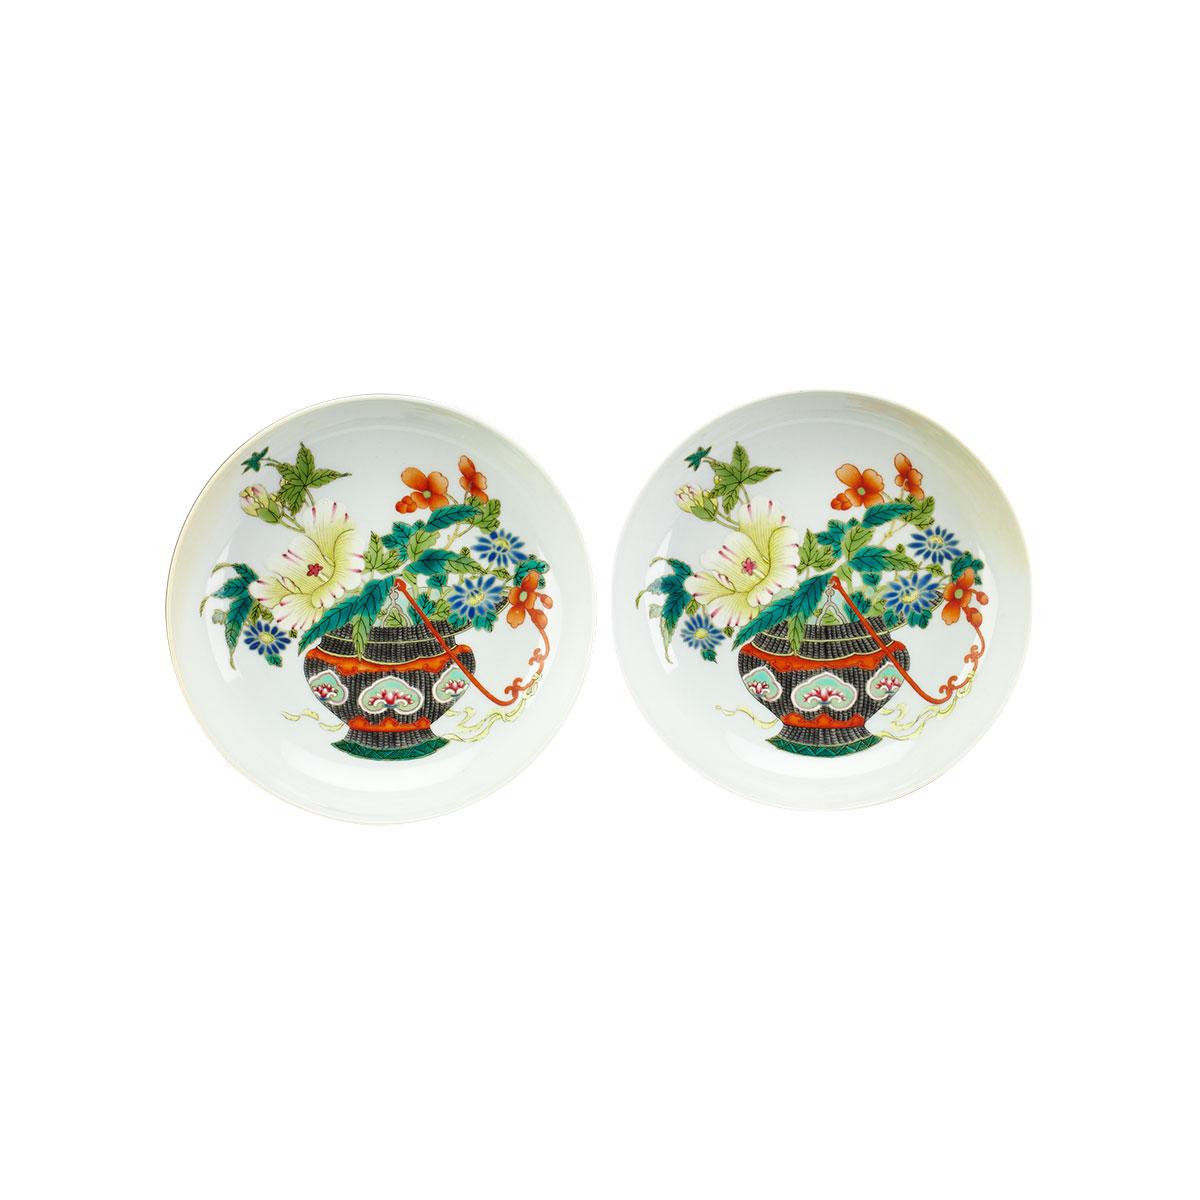 Pair of Famille Rose ‘Floral Basket’ Dishes, Xianfeng Mark and Possibly of the Period (1851-1861)